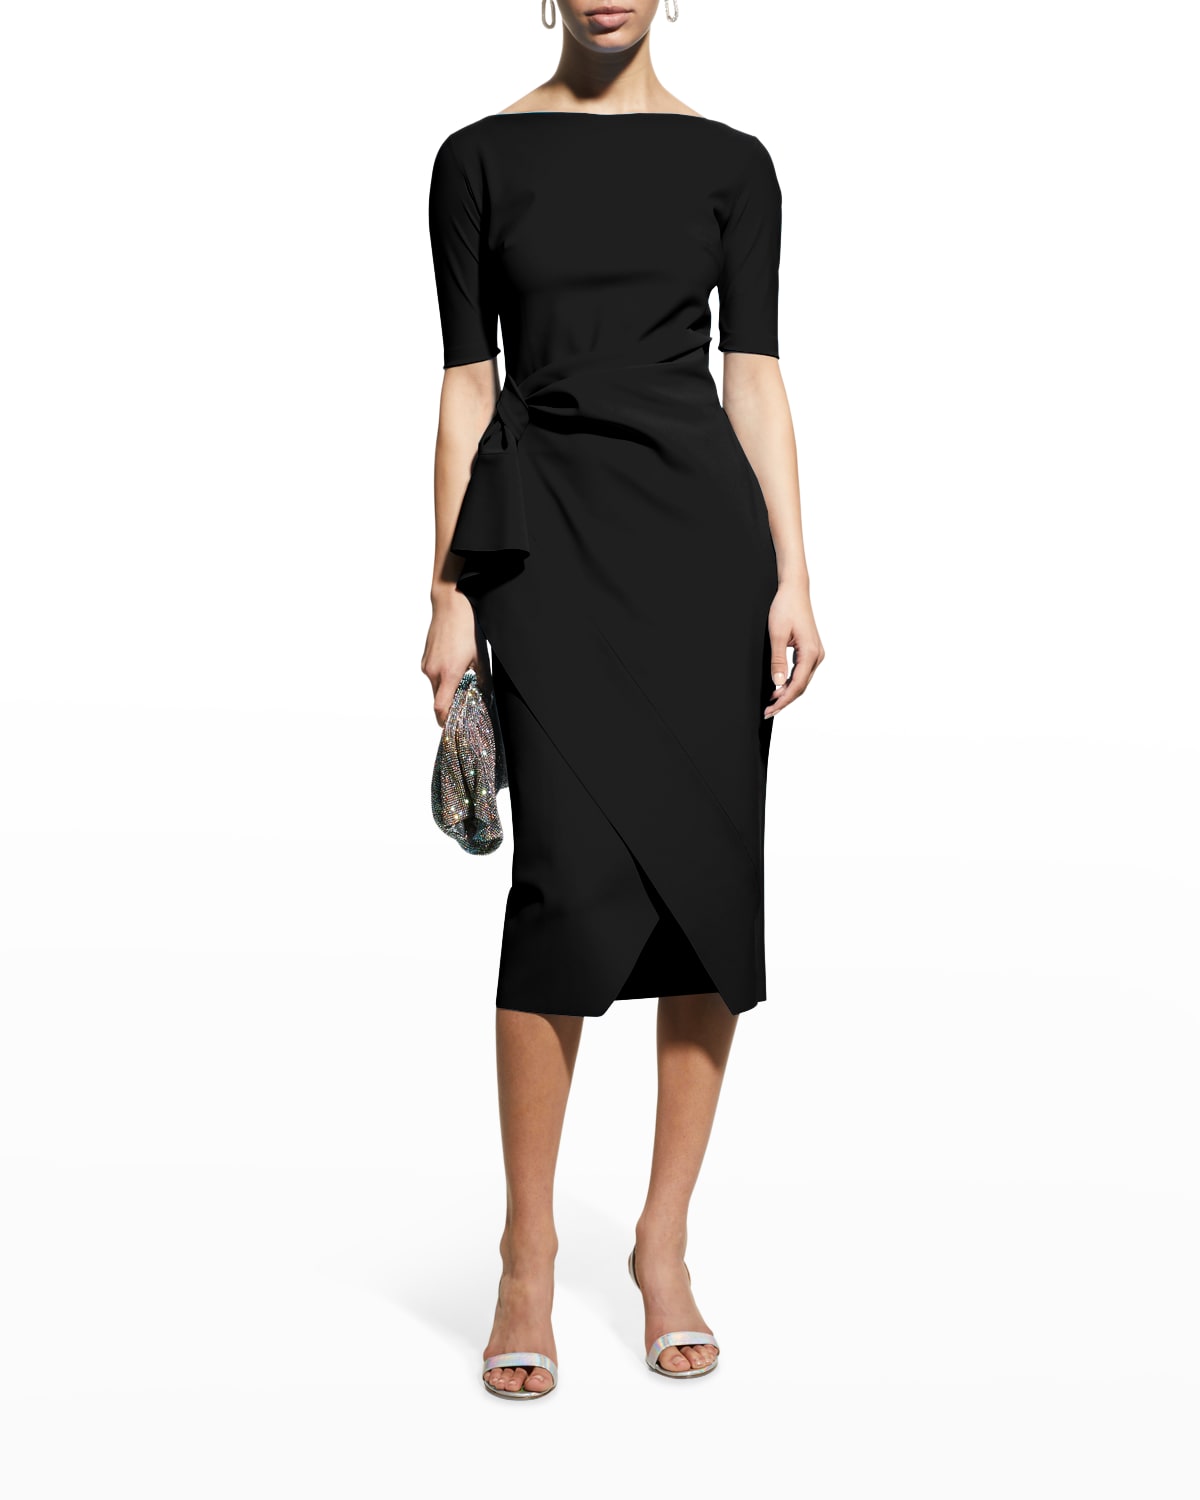 Style Edit: The Best Elegant Dresses to Wear for Work